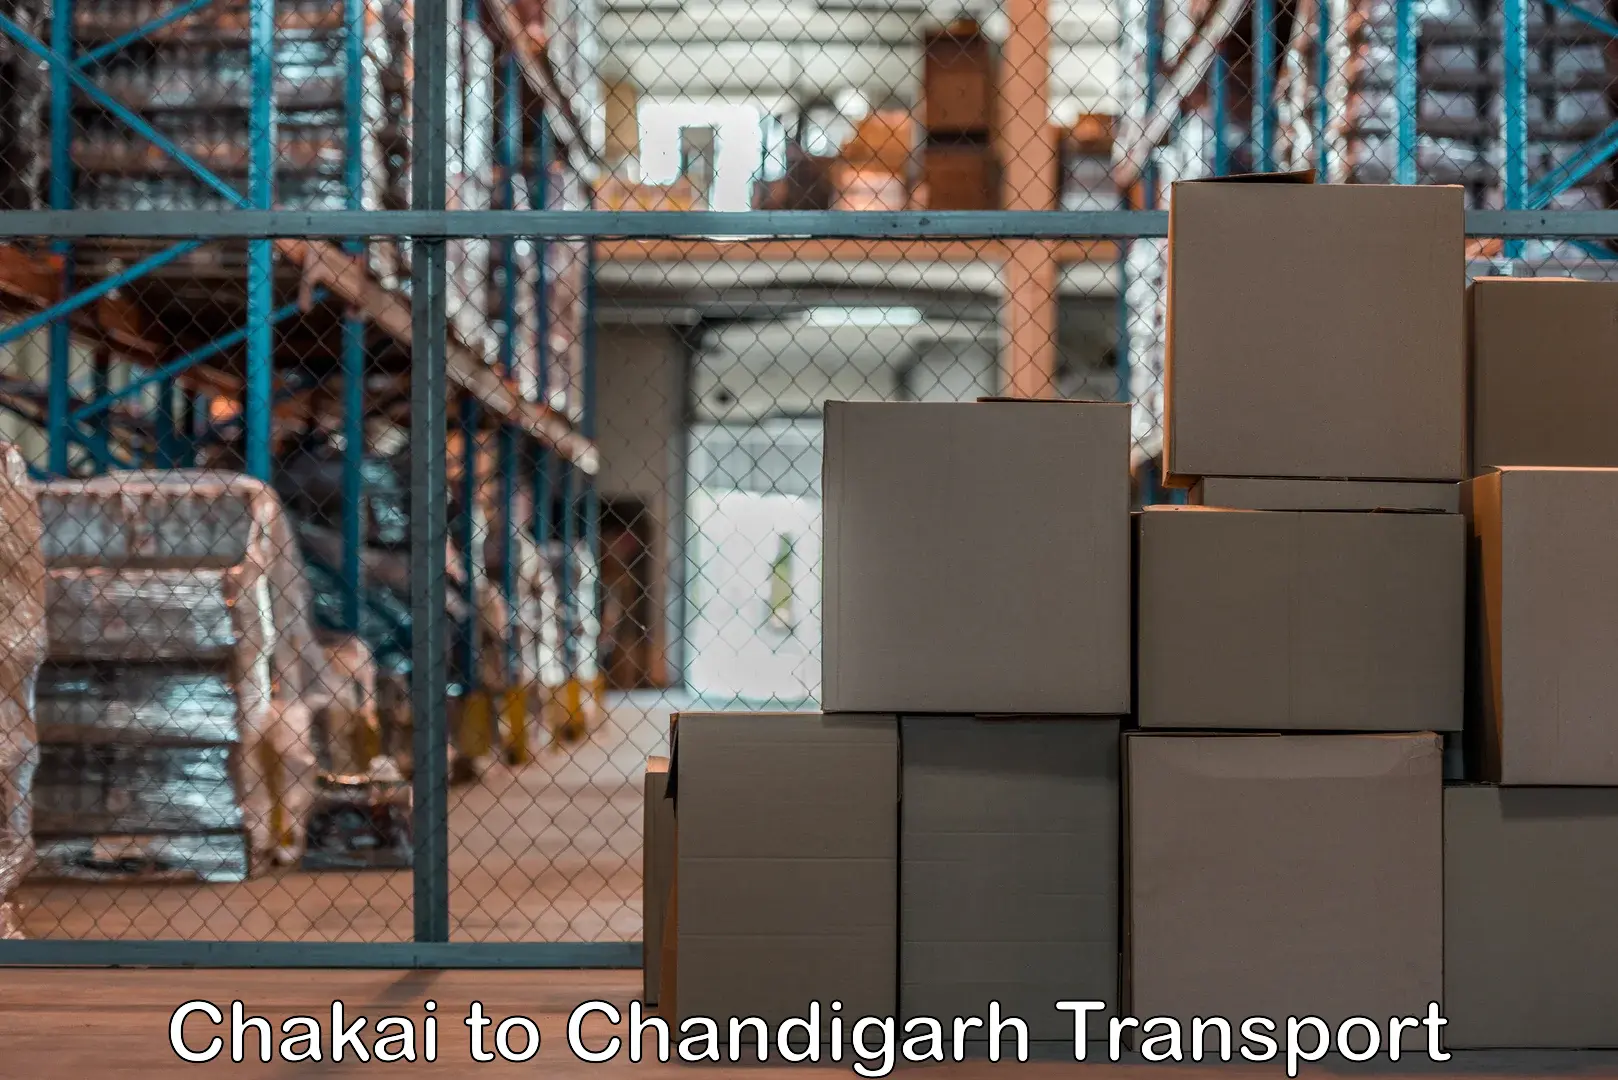 Delivery service Chakai to Chandigarh